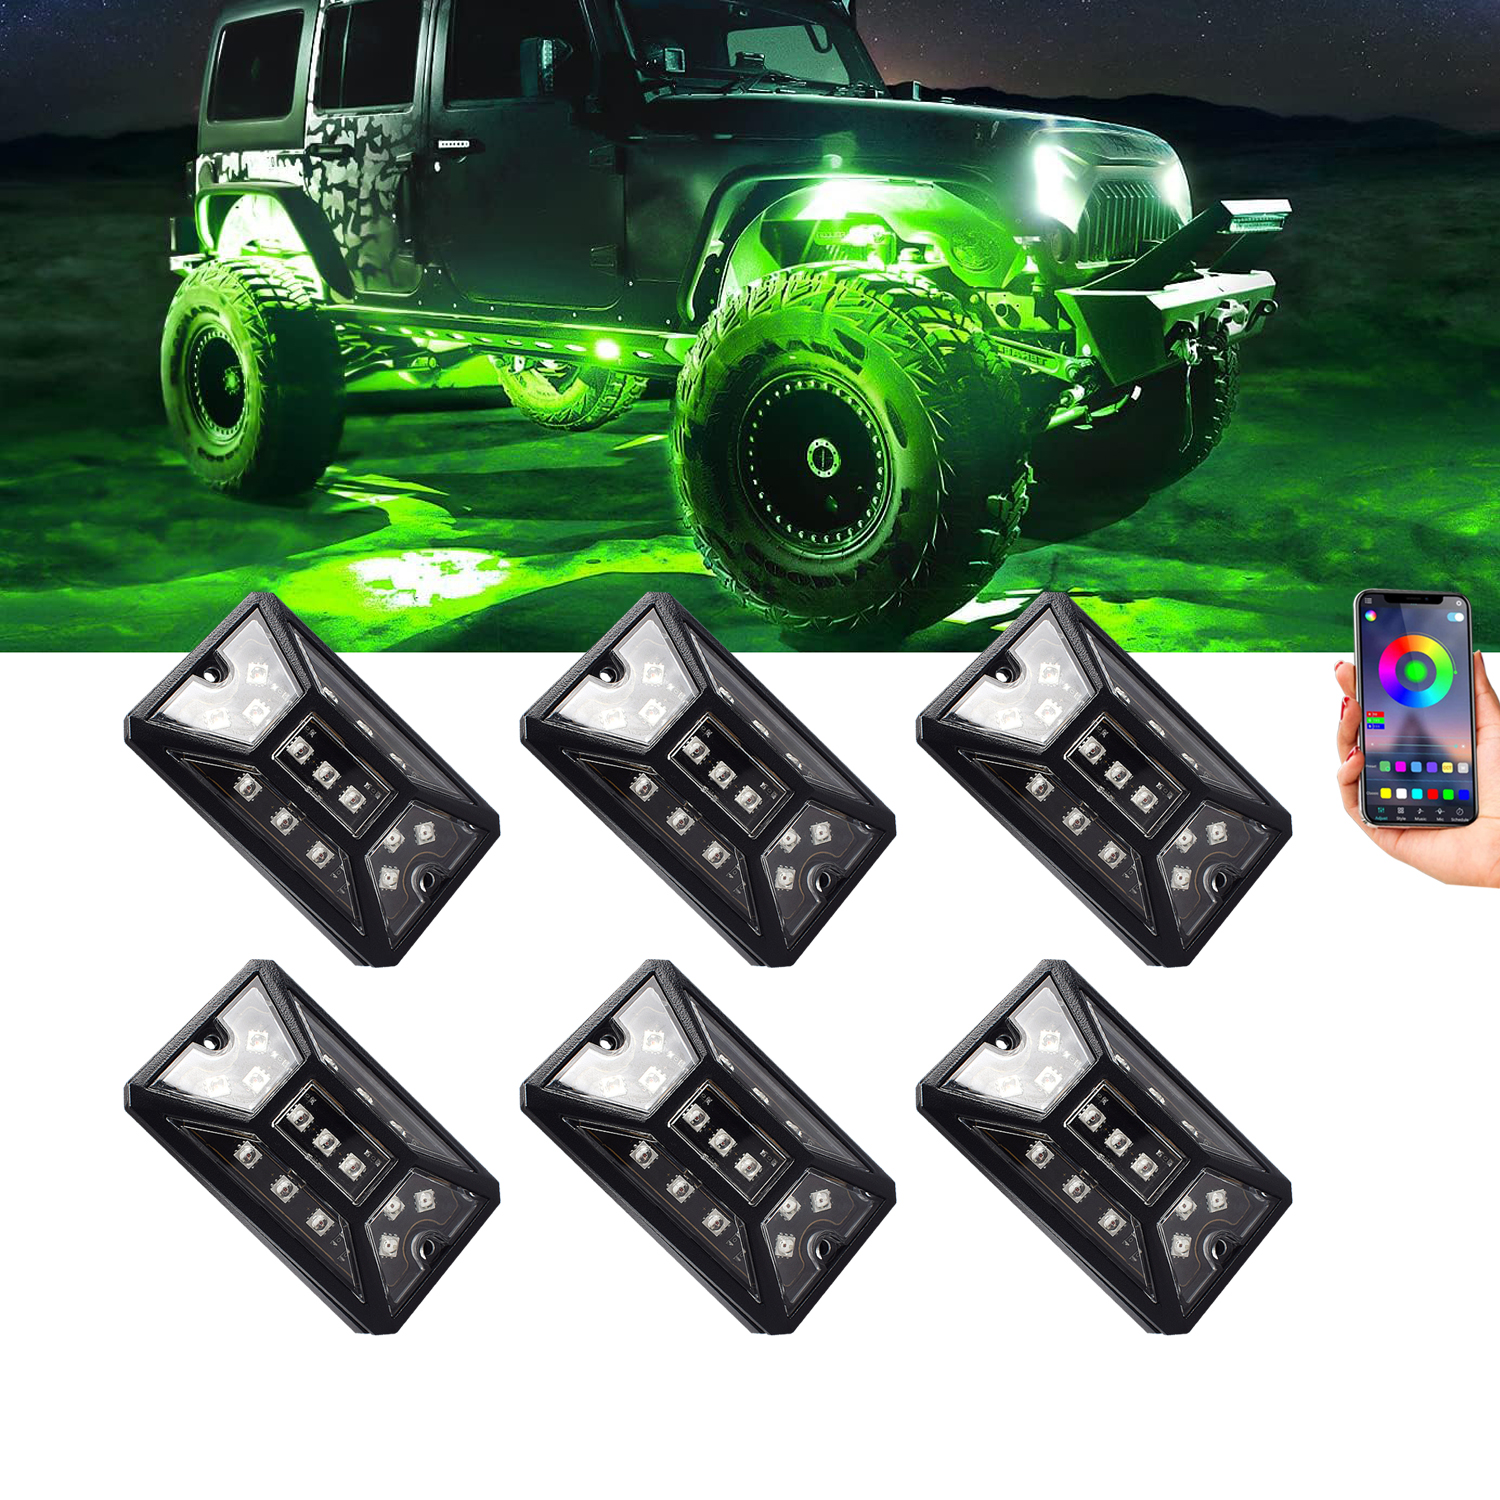 Bluetooth RGB LED Rock Lights Kit, Multicolor Neon Accent Music Flashing Lighting Underglow Kits with RF Controller for Off-Road, Trucks, Cars, UTV, ATV, SUV, RZR, Motorcycles, Boats - COPY - fdf63g